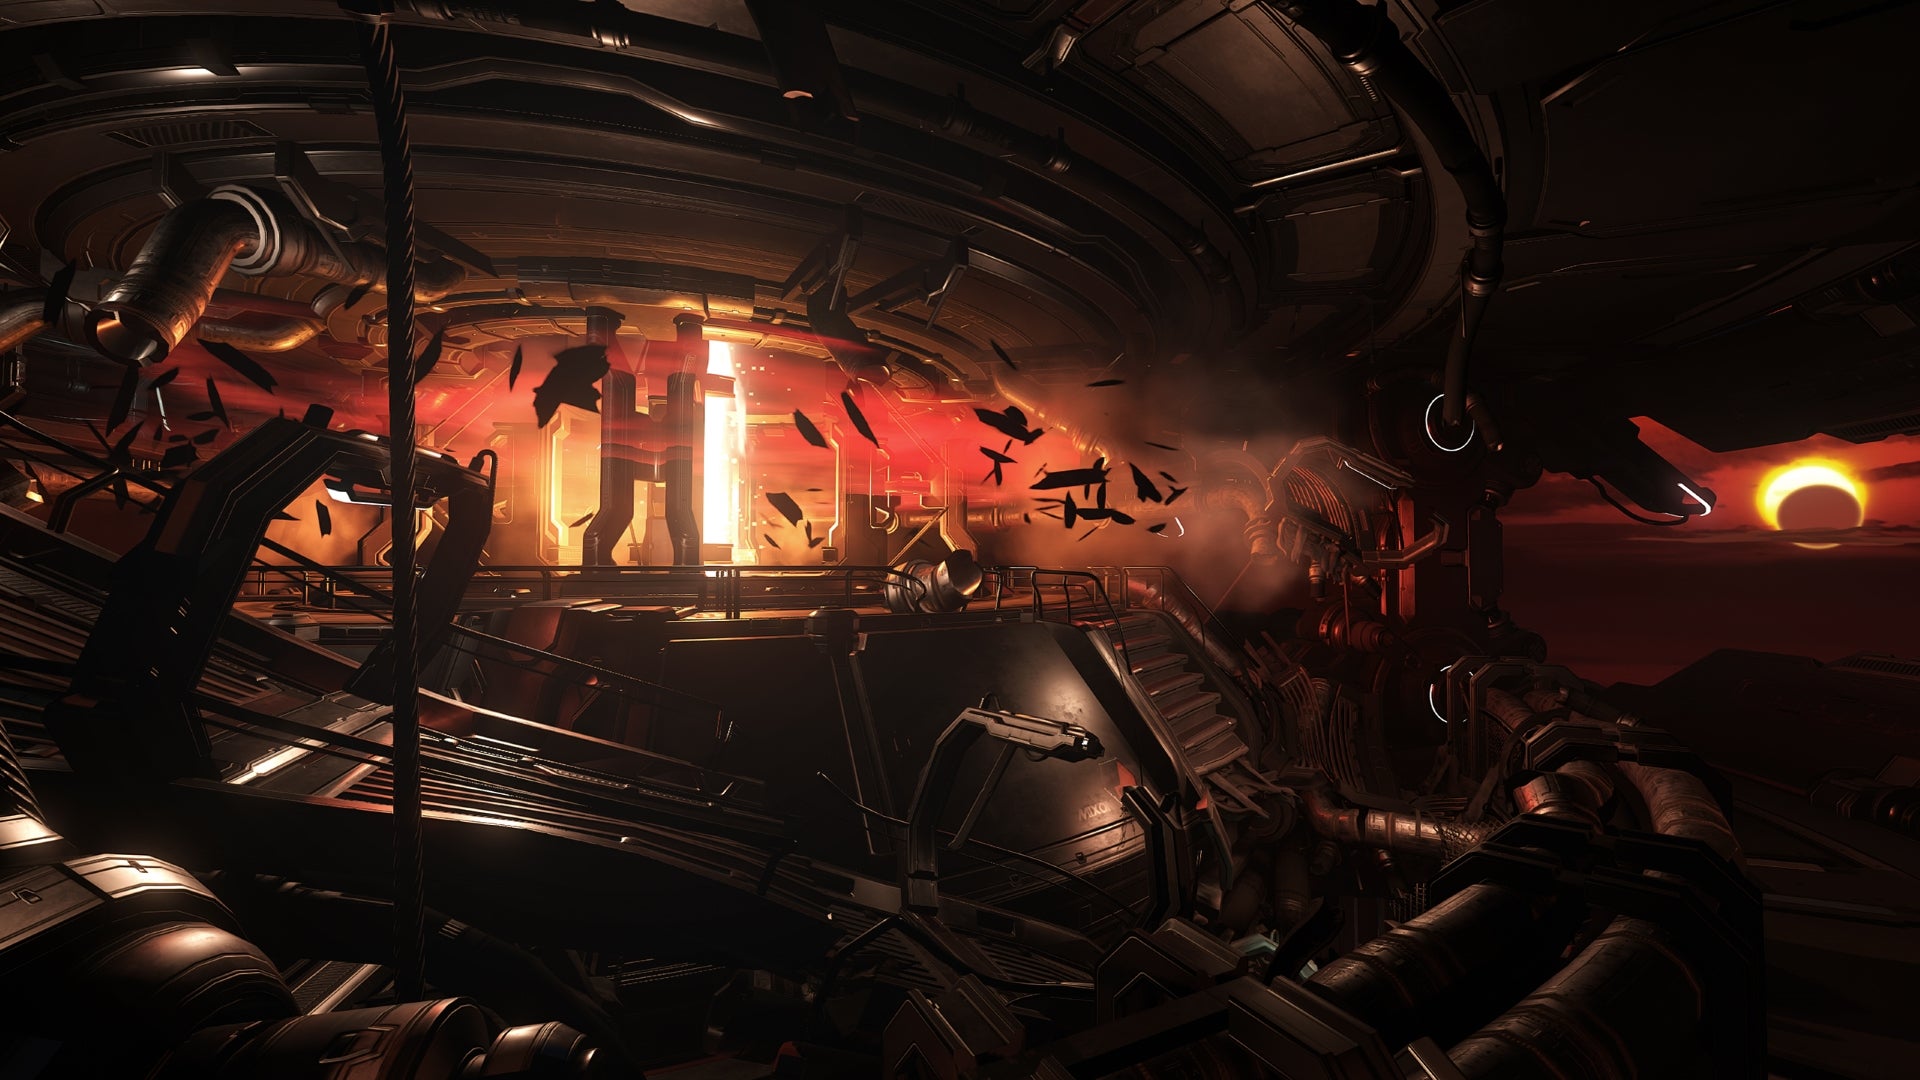 Screenshot of Doom VFR game showing a chaotic space station interior.